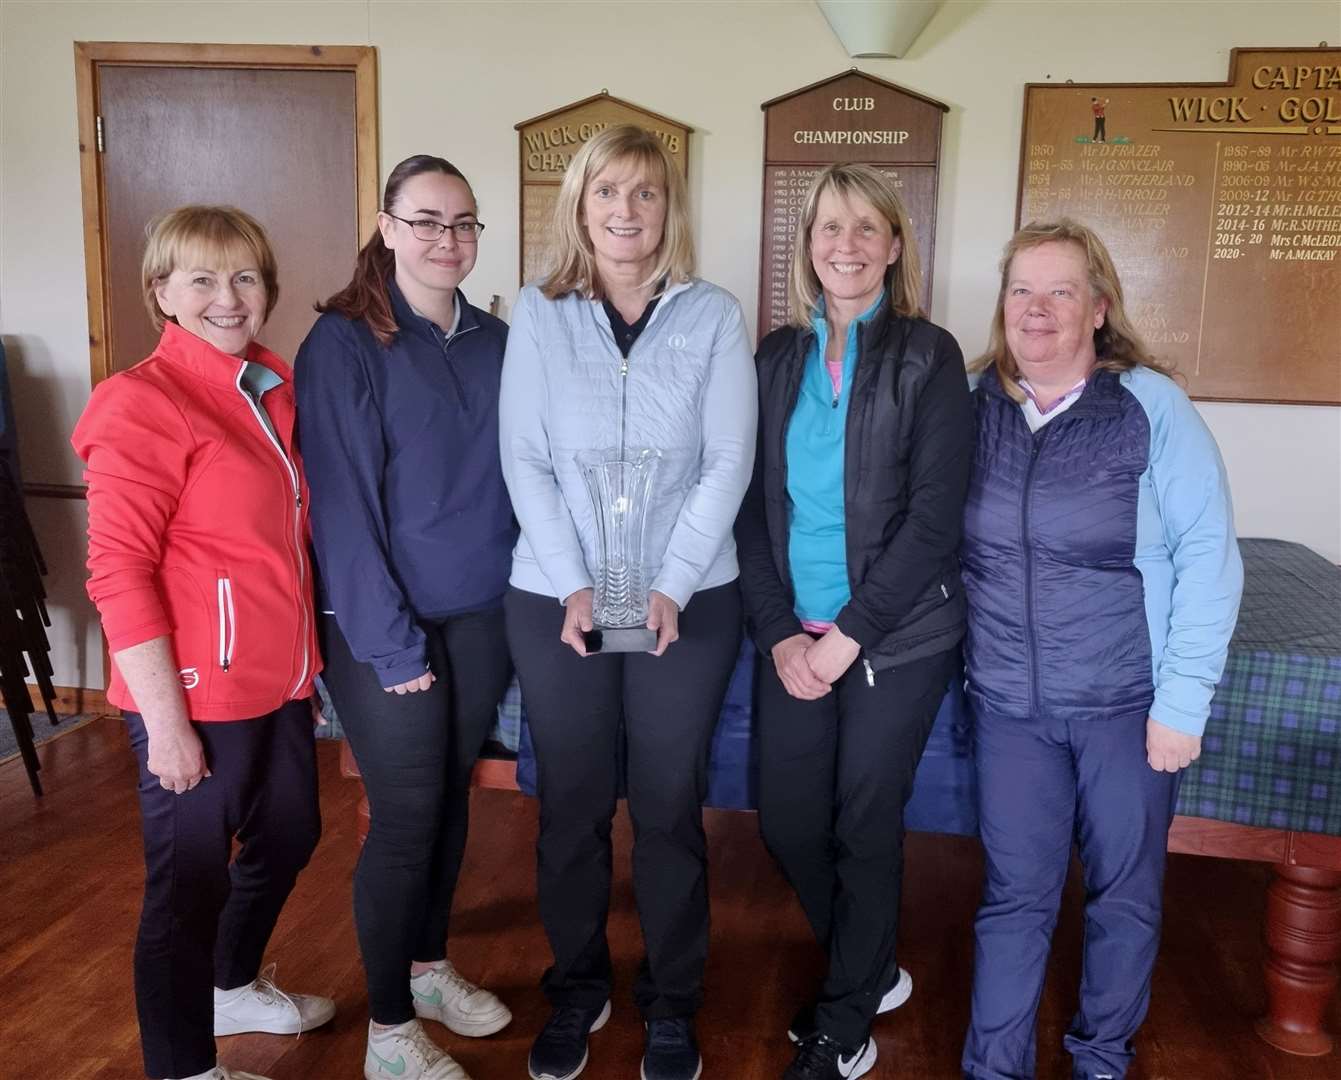 Americas Cup winners from Reay Golf Club – Alison Ross, Sarah Meiklejohn, Carol Paterson, Pam Bain and Jacqui Greig. Mollie O’Brien was also in the team.